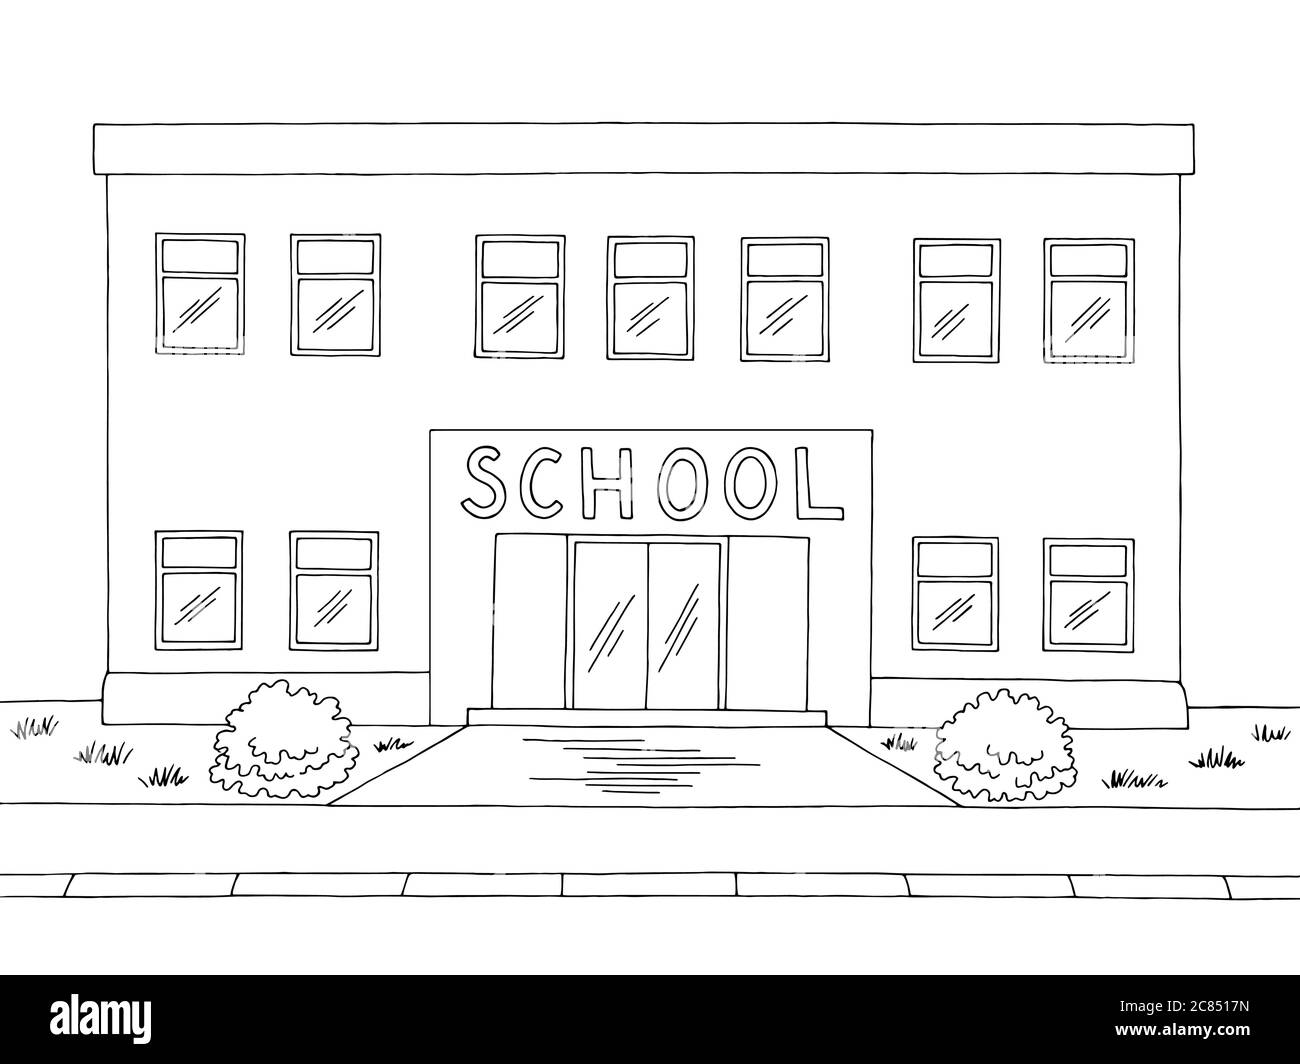 School building front view exterior graphic black white sketch illustration vector Stock Vector